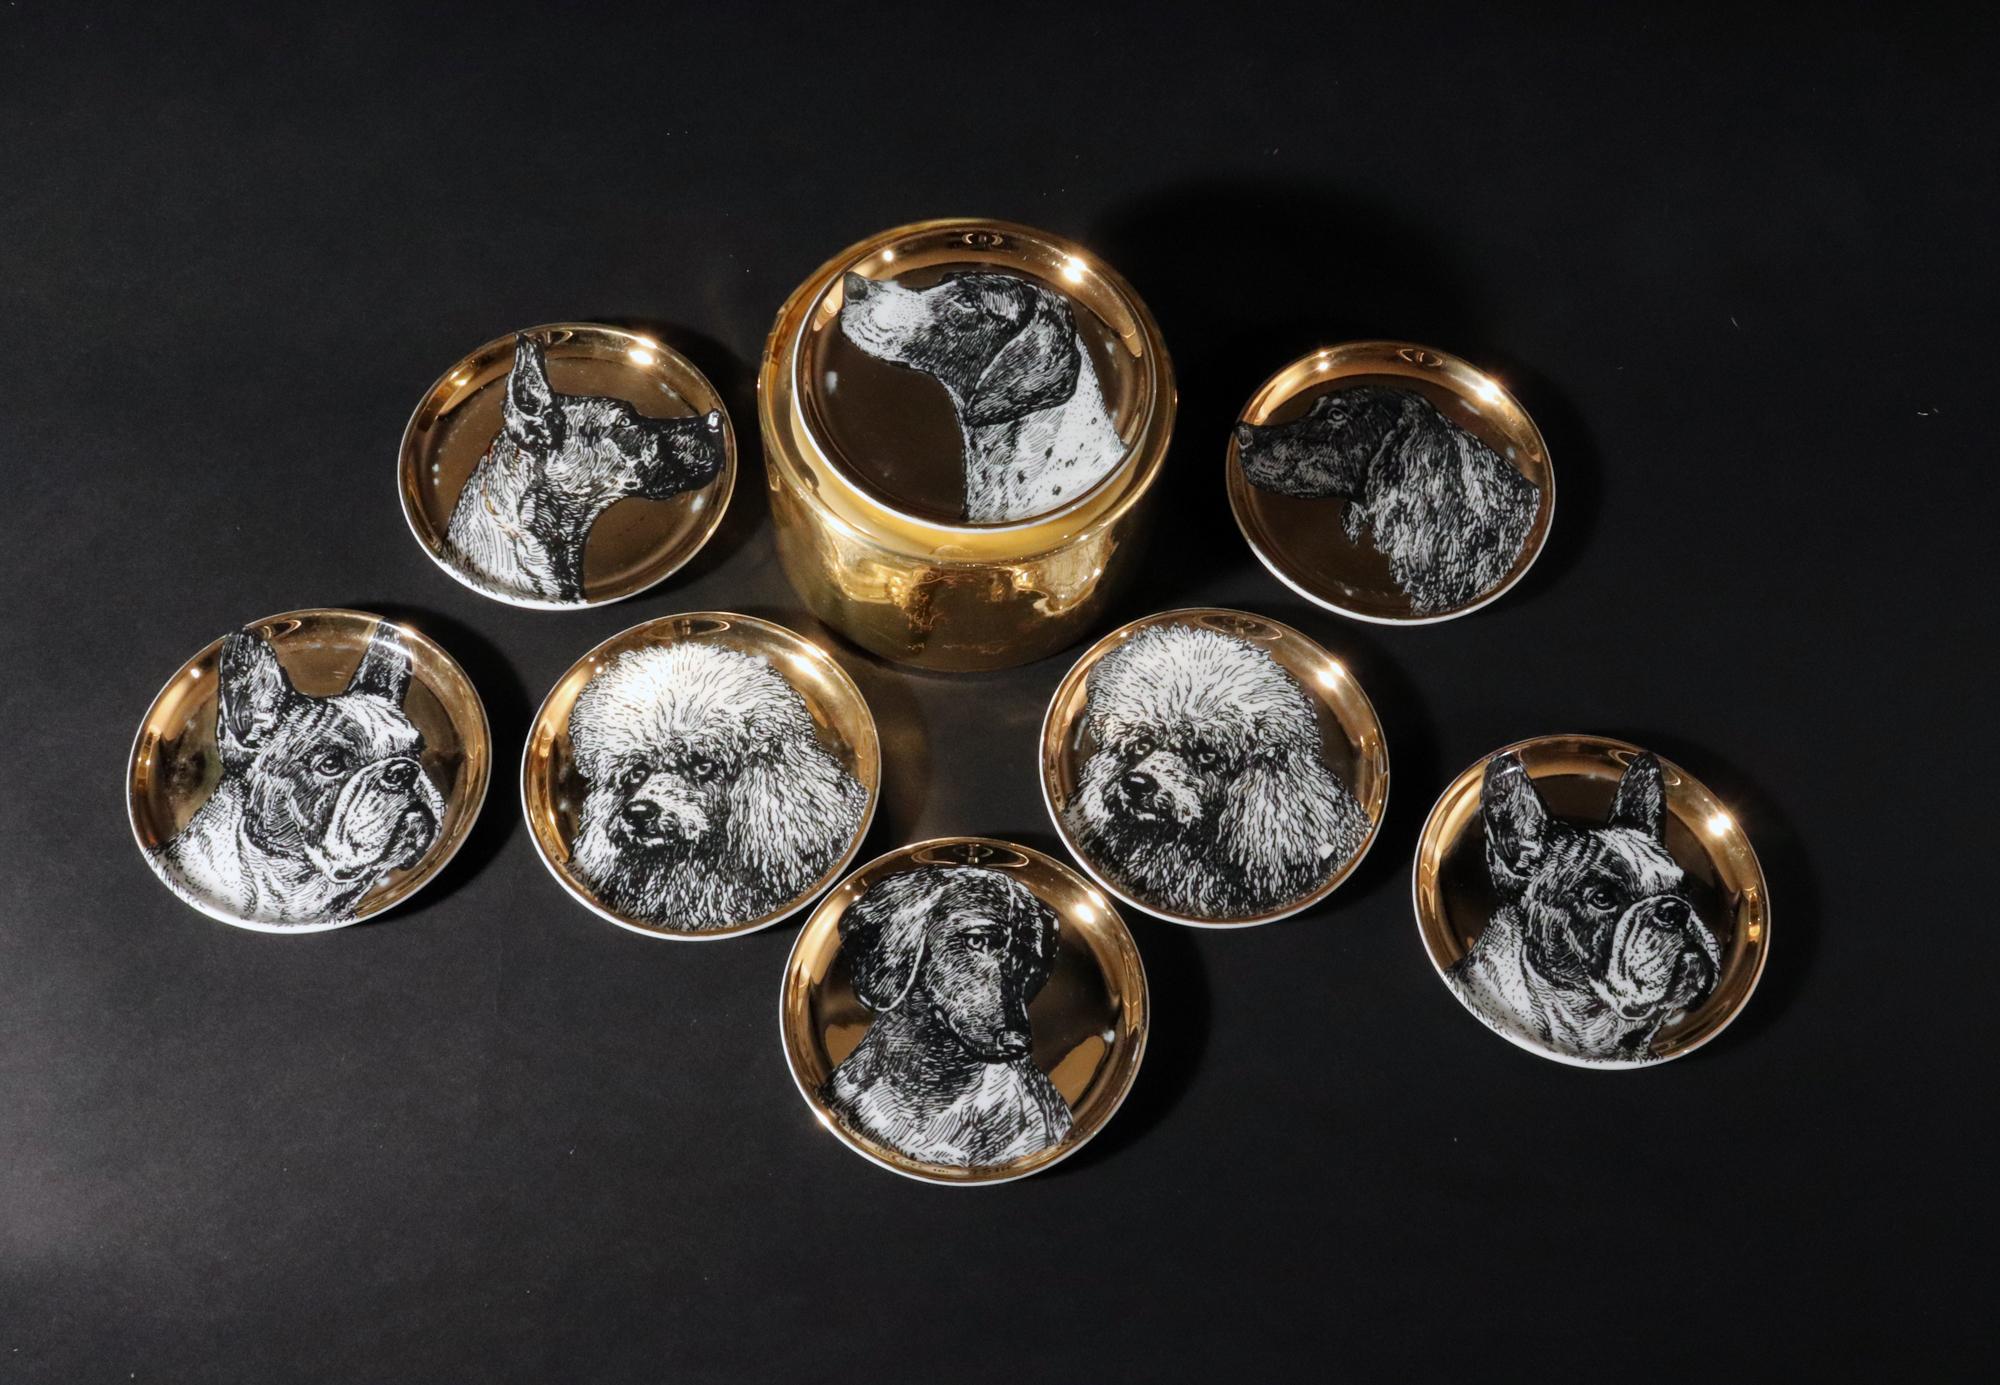 Piero Fornasetti Ceramic Coaster Set of Eight Decorated with Dogs,
Cani Pattern (Dogs),
Within Original Gold Foil Box,
1950s

This rare set of Piero Fornasetti ceramic coasters is rarely found.  Each coaster has a gold ground and a different black